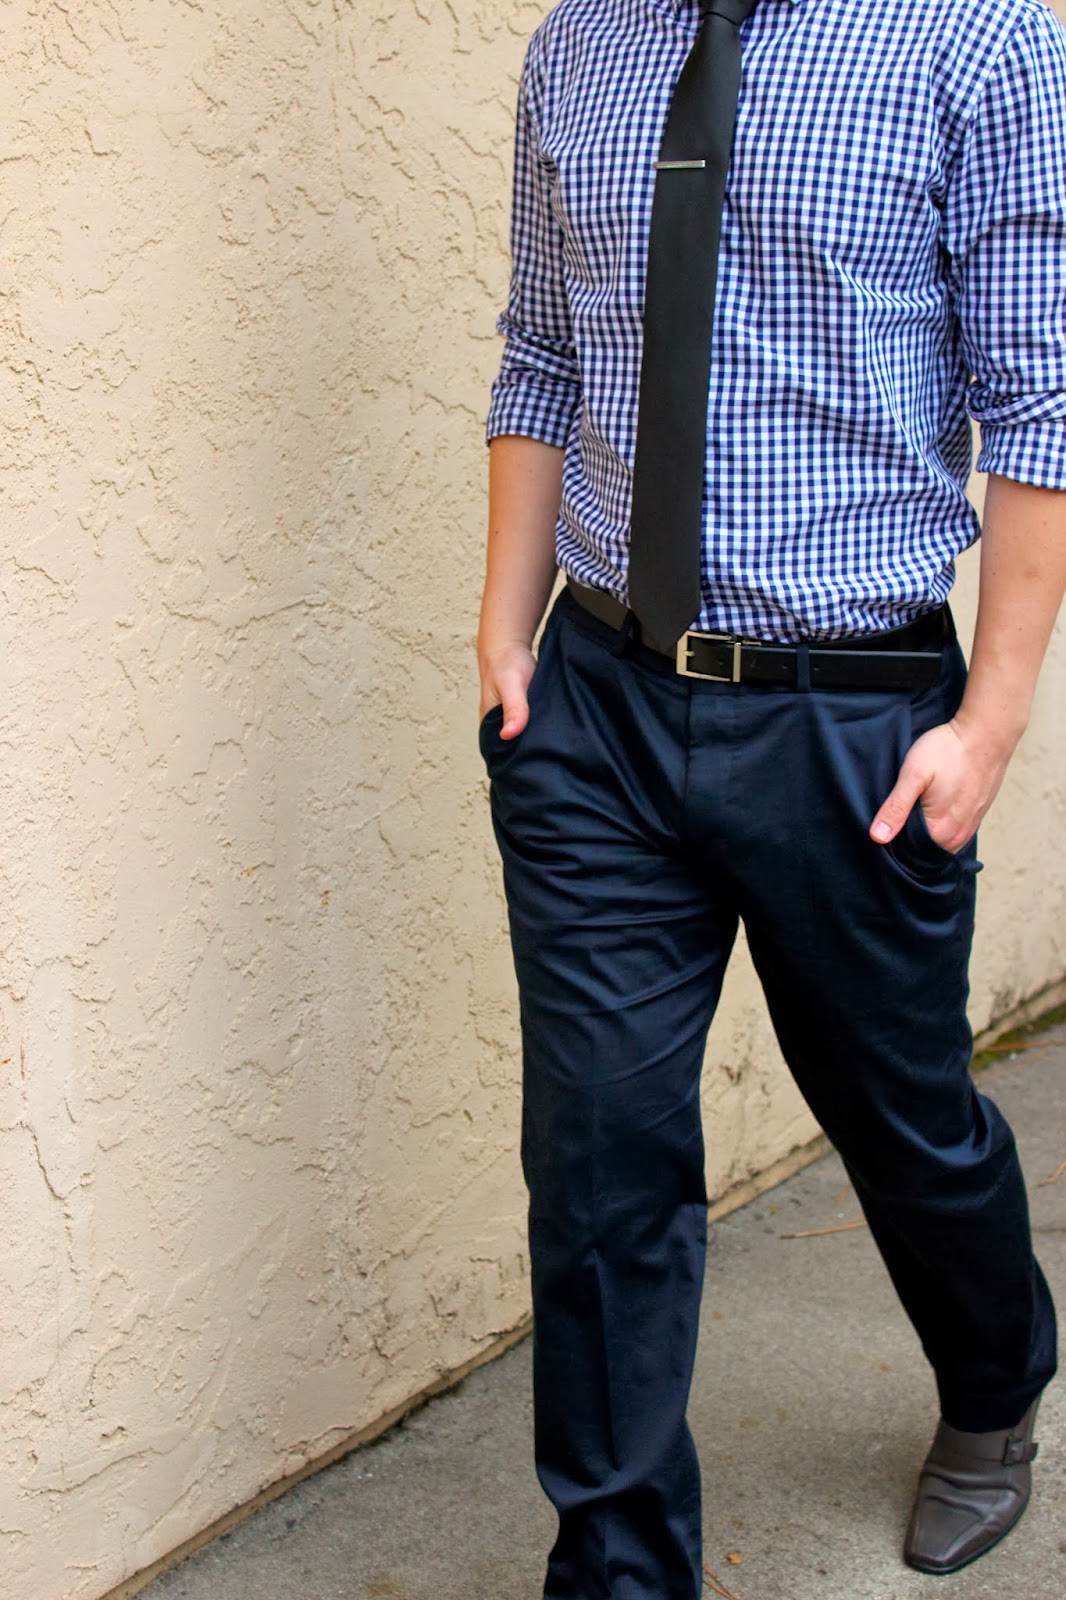 P2P: Men's Fashion: Love for Gingham